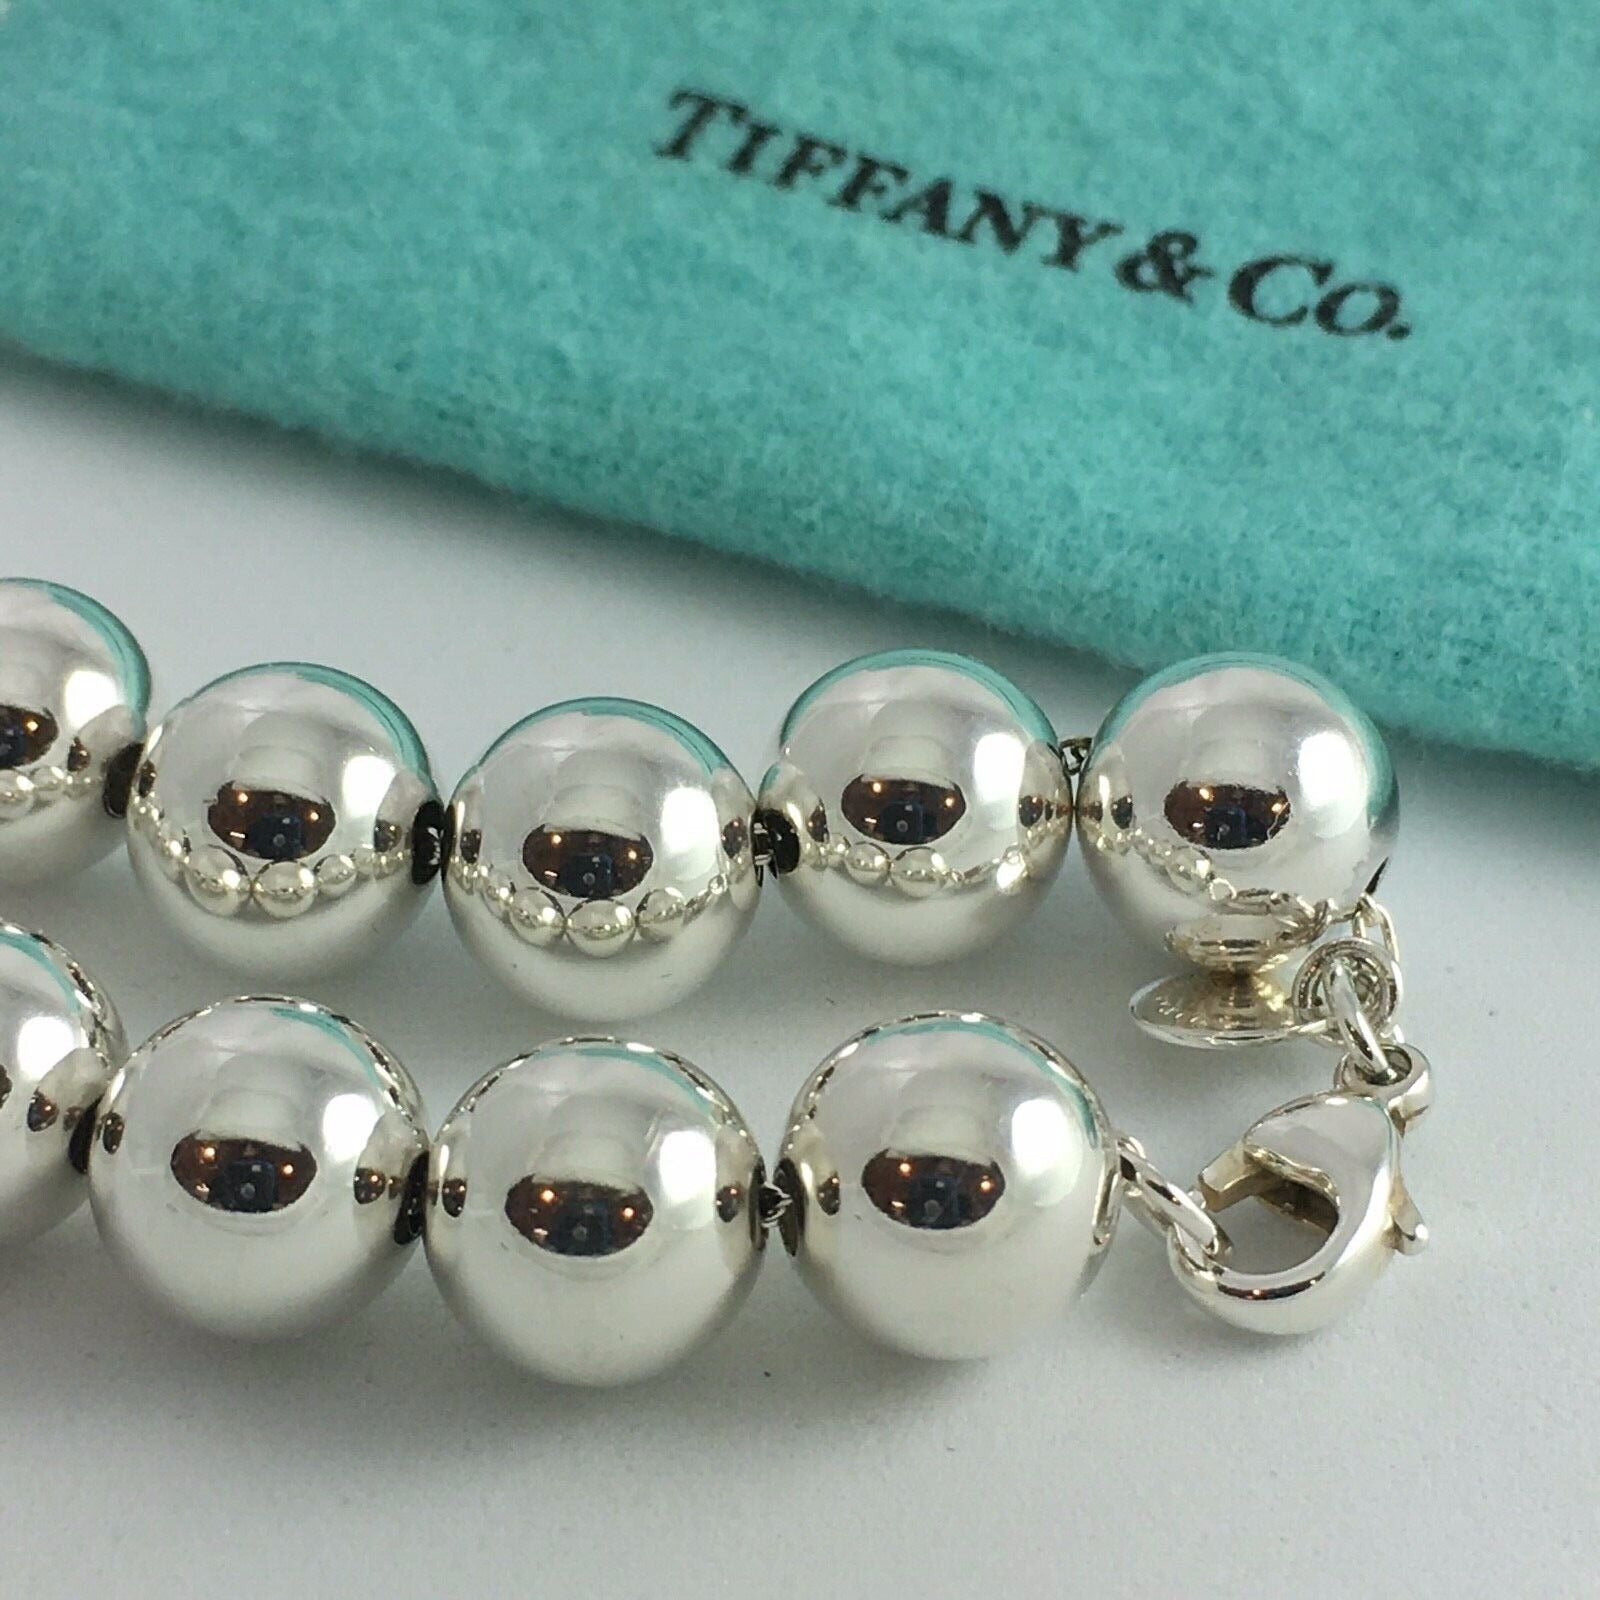 Tiffany & Co. Hardwear Collection Ball Bracelet in Silver 7.5 in. | New  York Jewelers Chicago